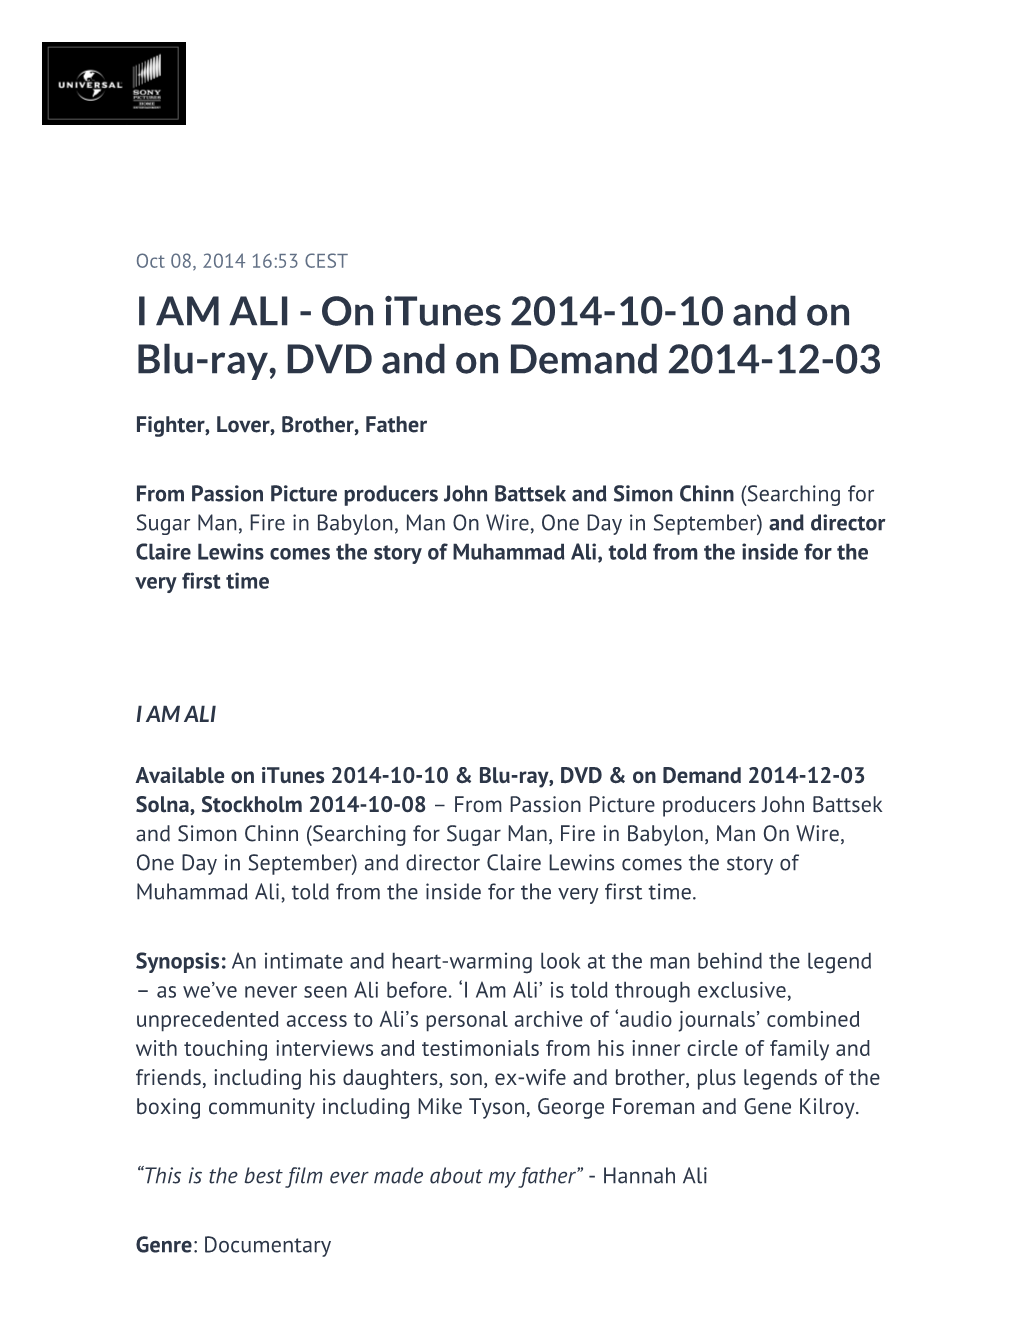 I AM ALI - on Itunes 2014-10-10 and on Blu-Ray, DVD and on Demand 2014-12-03